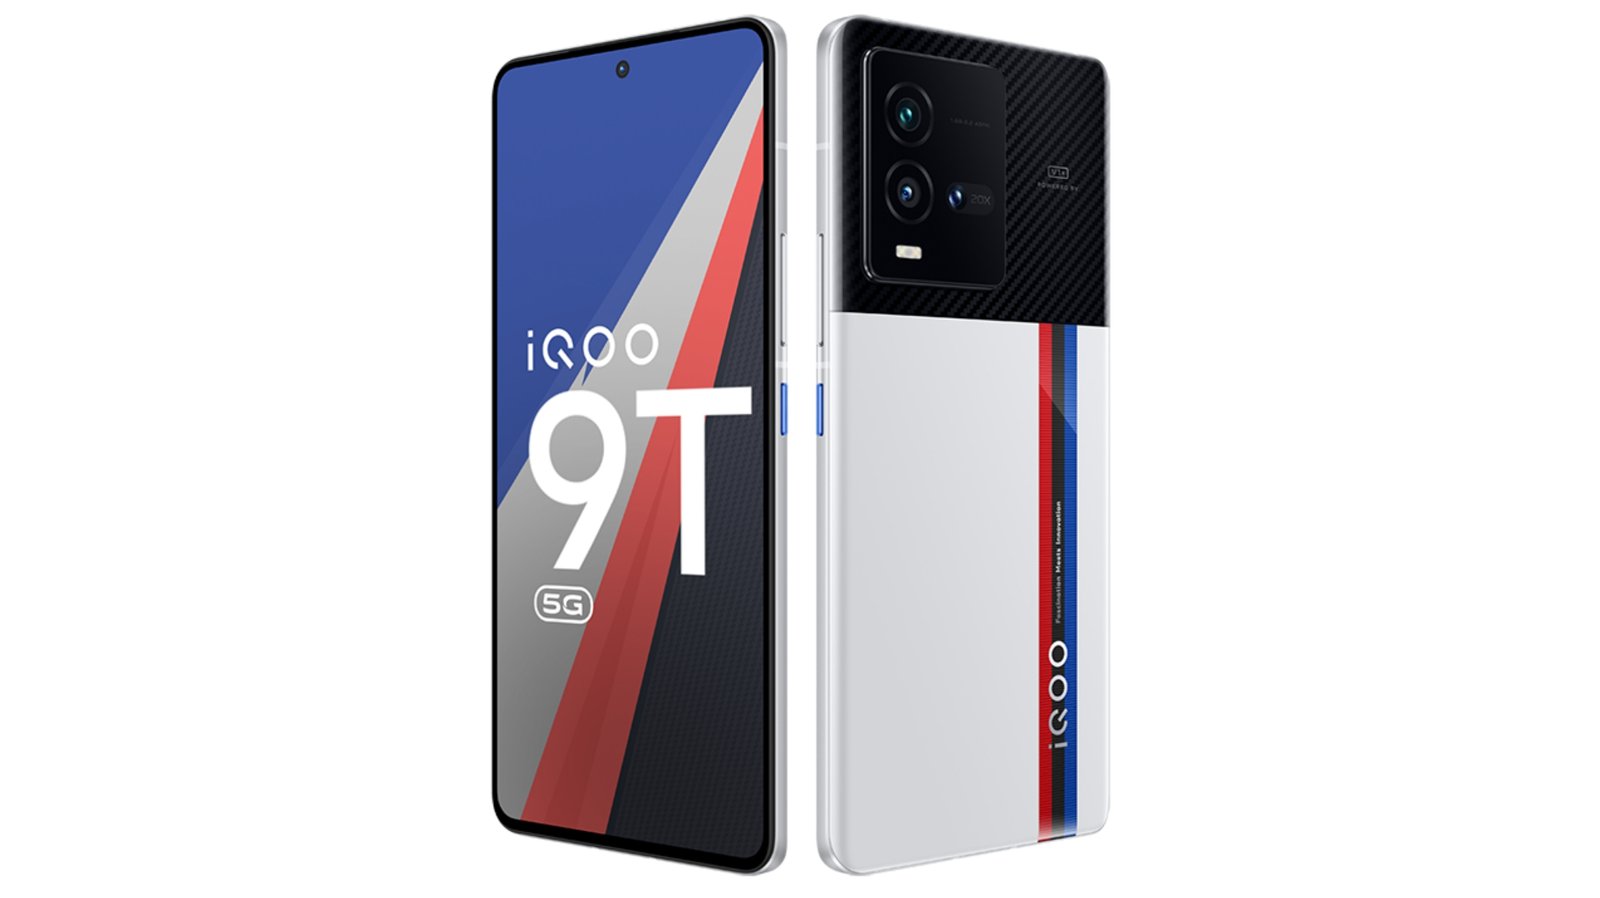 iQOO-9T-launched-with-120W-super-fast-charging-Snapdragon-8+-Gen-1-chipset-and-more